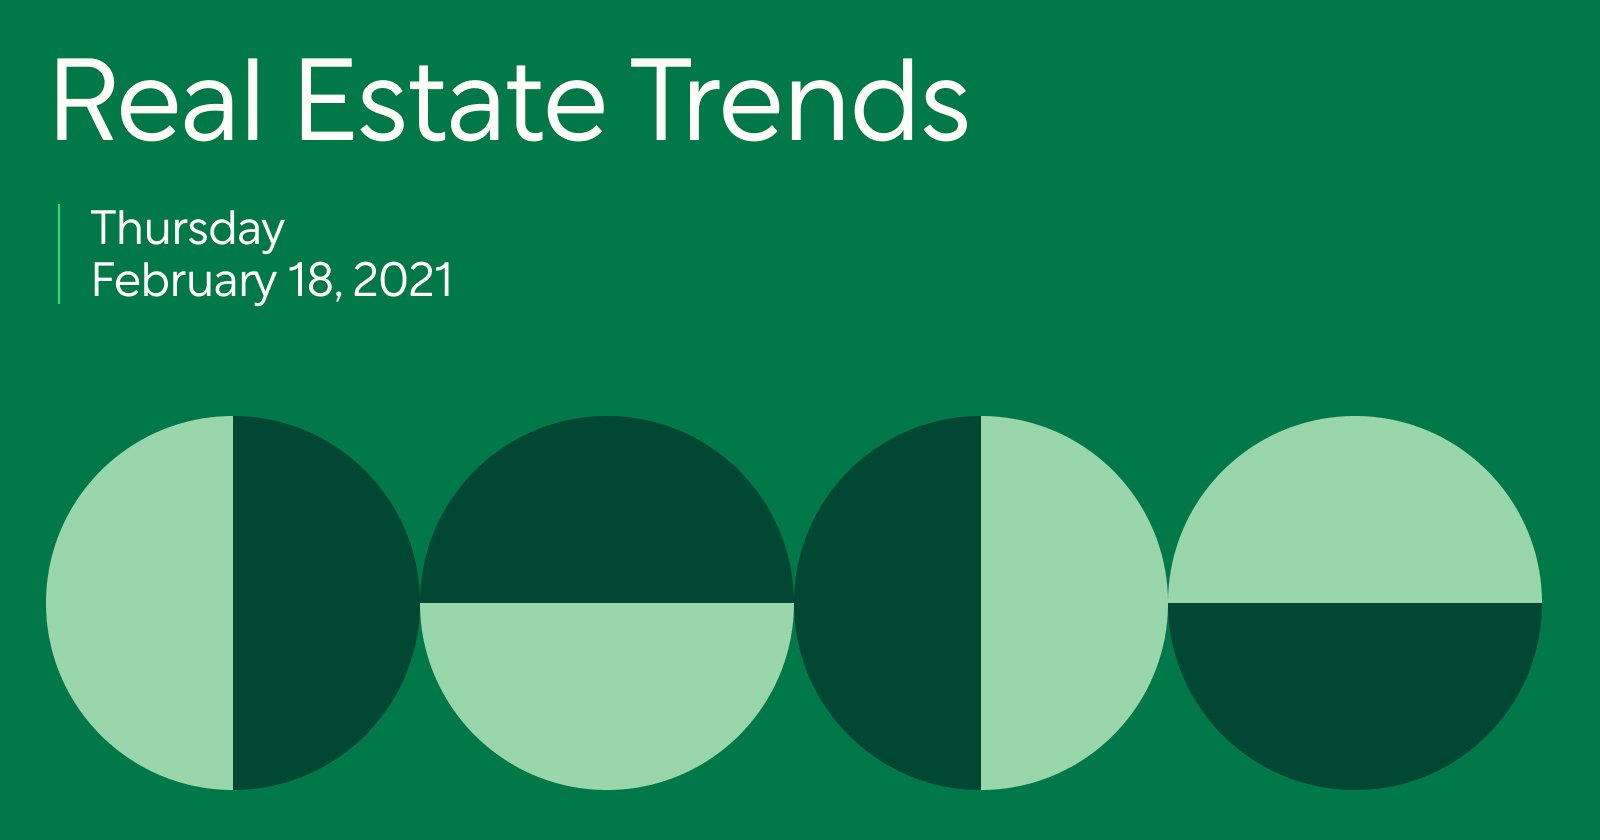 Real Estate Trends 2/18/21: Increased Jumbo Loan Activity and Larger Down Payments Boost Buying Power